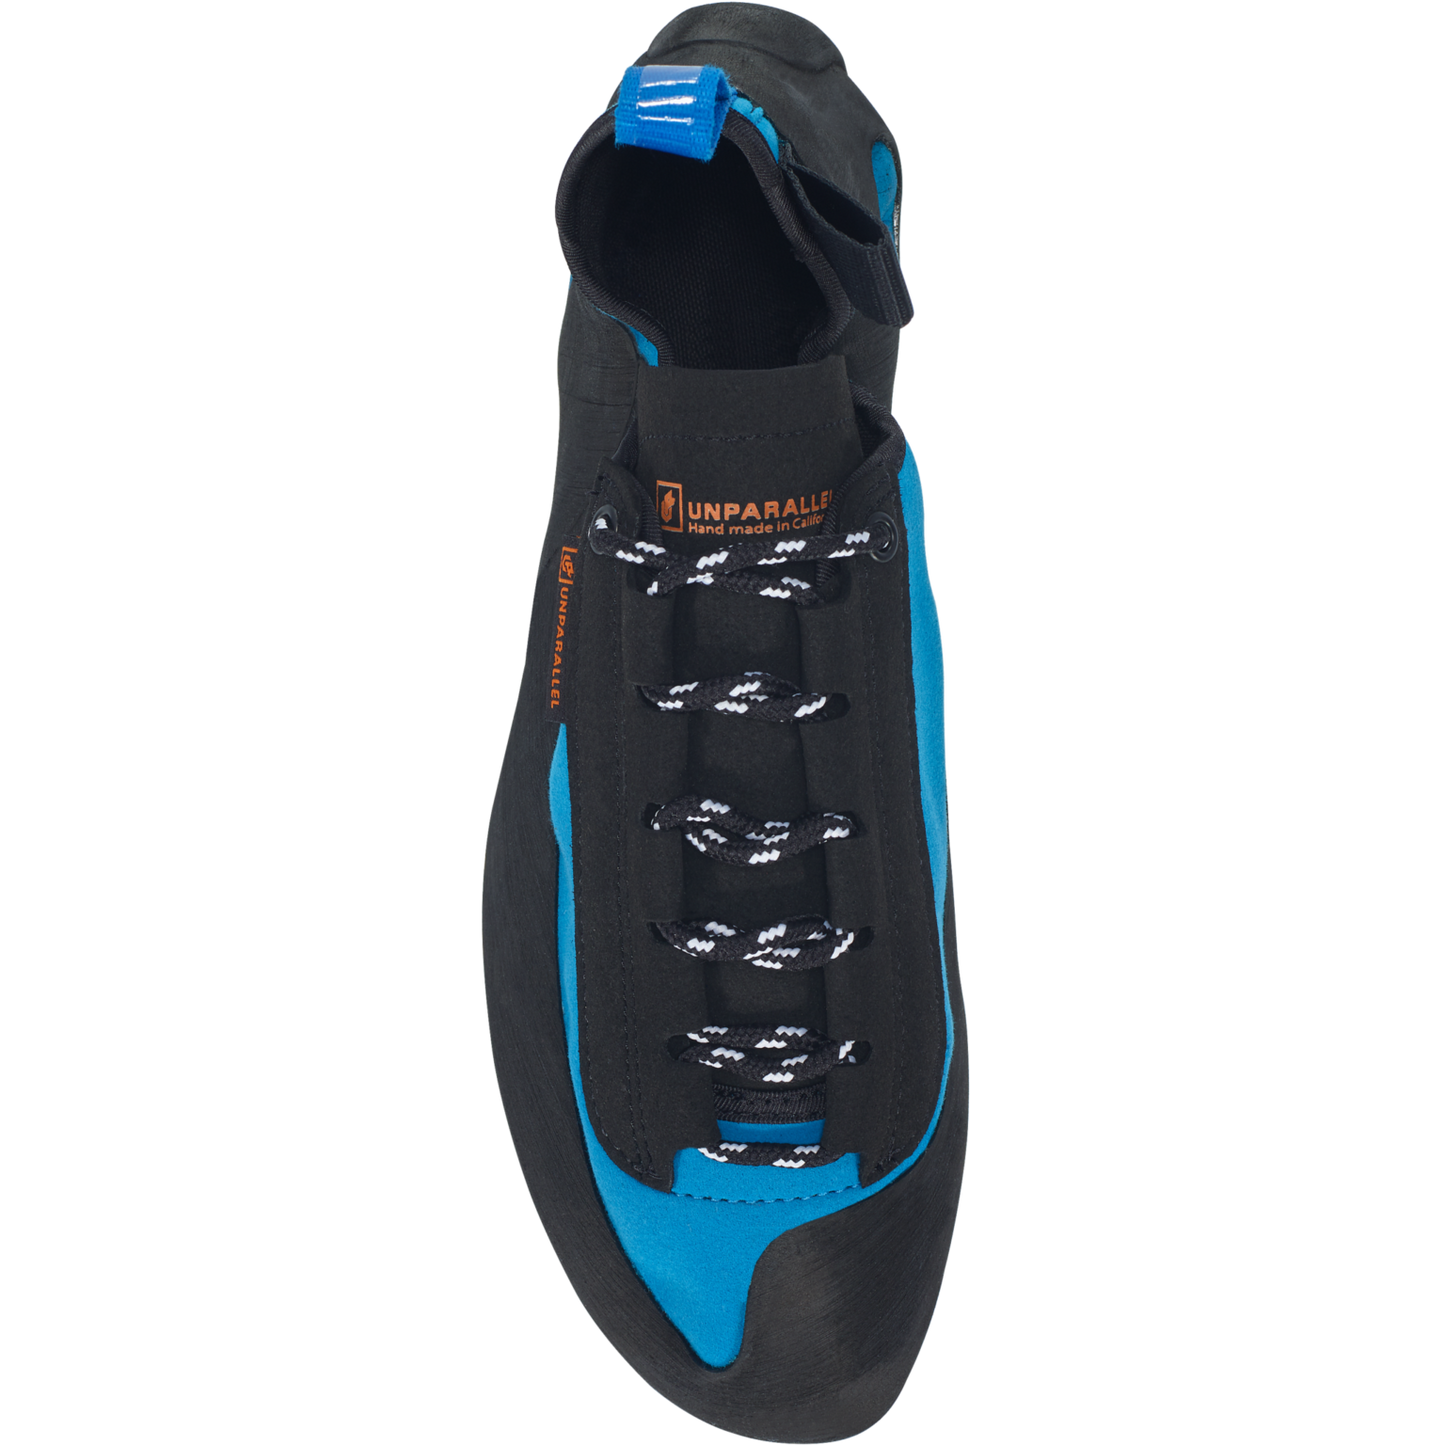 Unparallel Up Lace Climbing Shoe